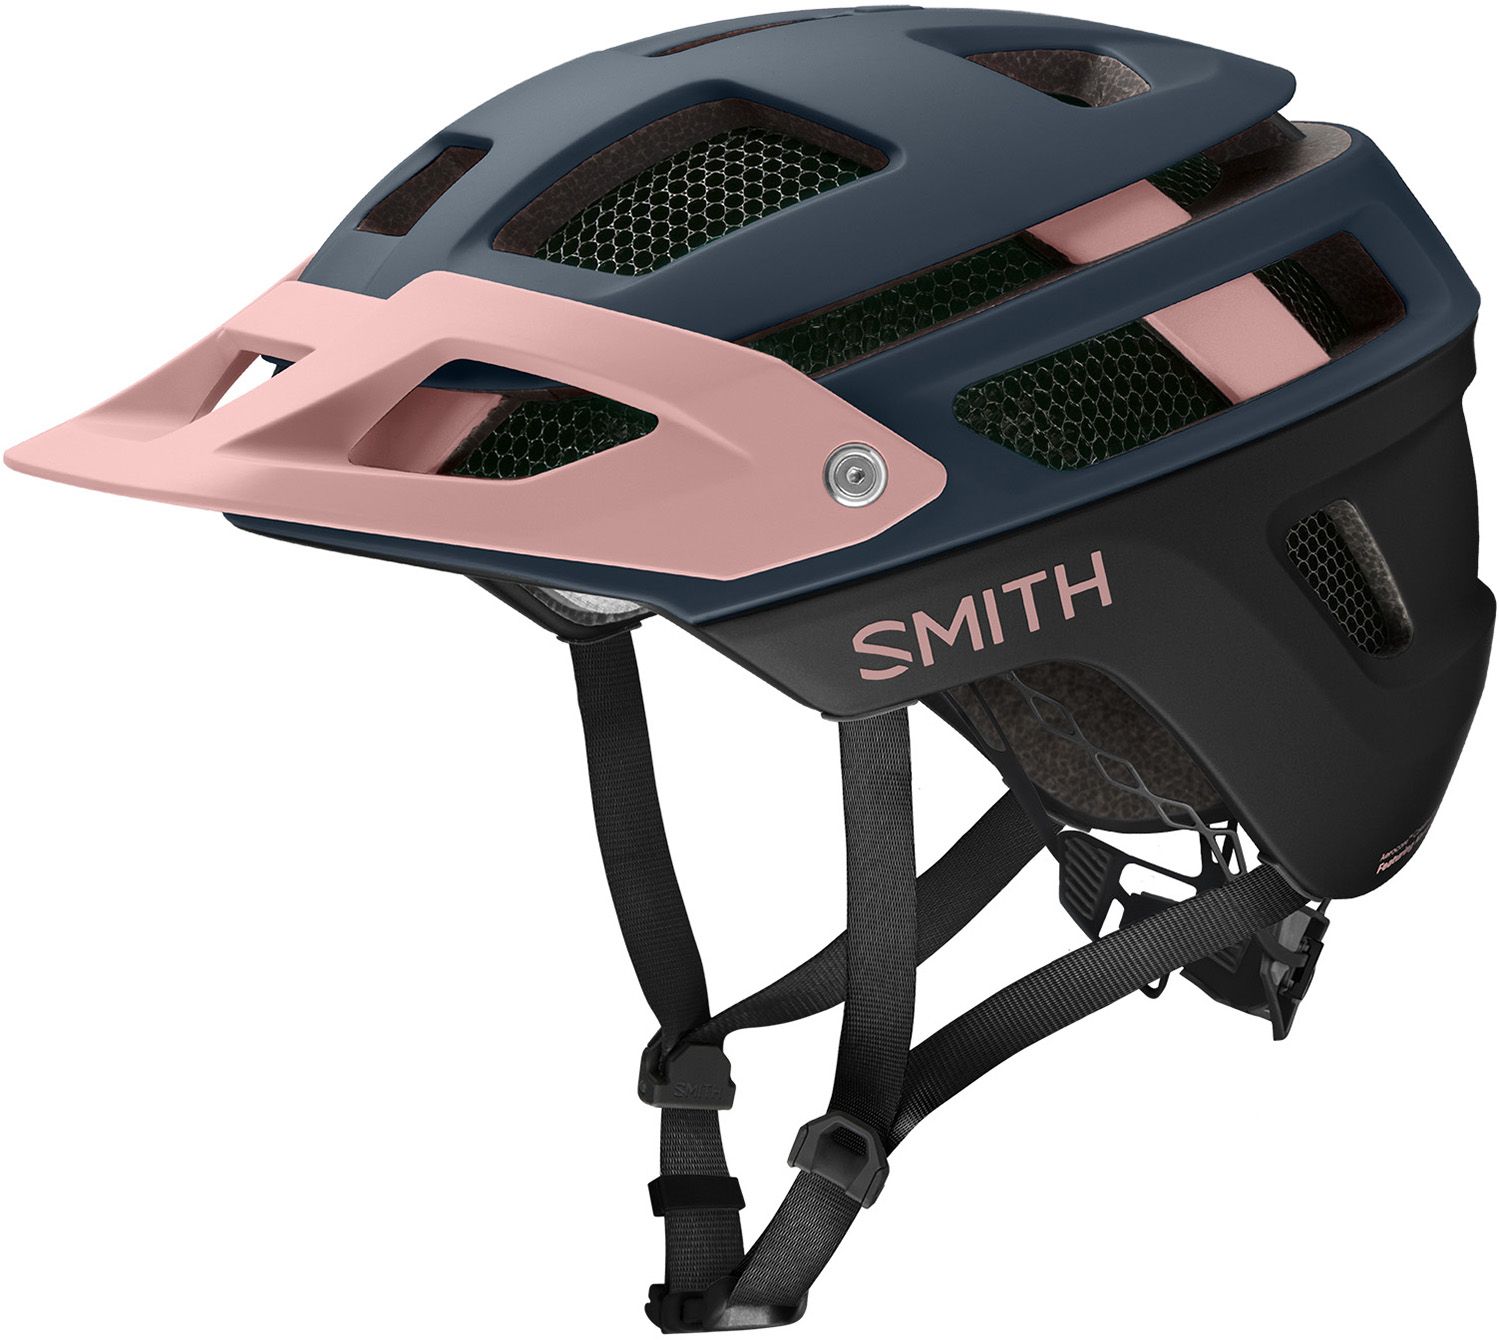 Photos - Bike Helmet Smith Adult Forefront 2 MIPS Mountain , Small, MatteFrenchNavyB 